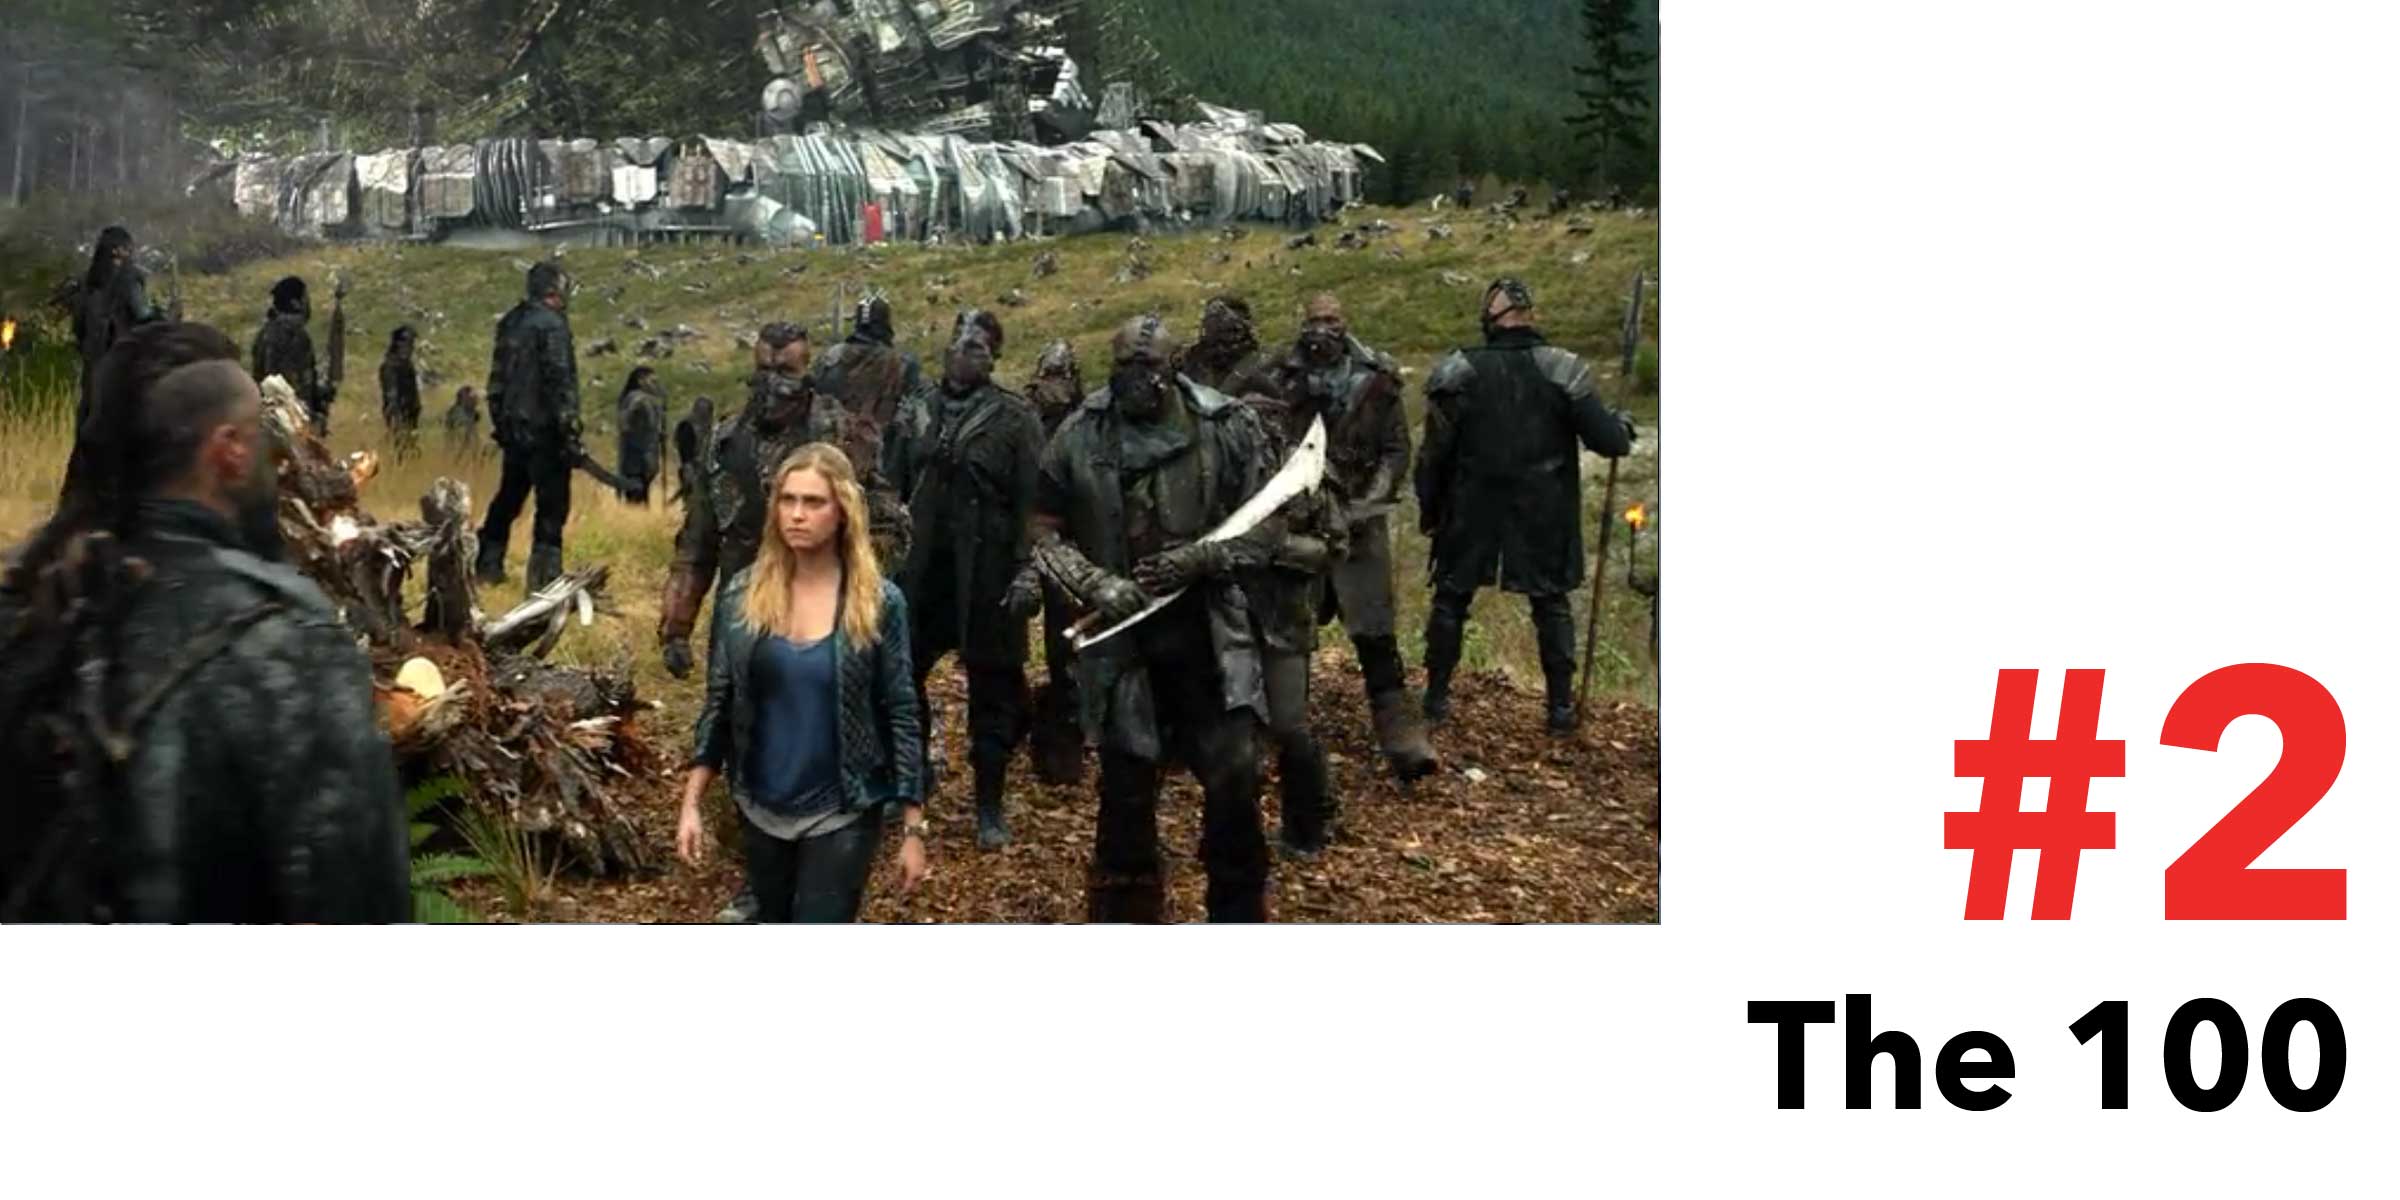 A group of people with swords approach a campsite. The 100